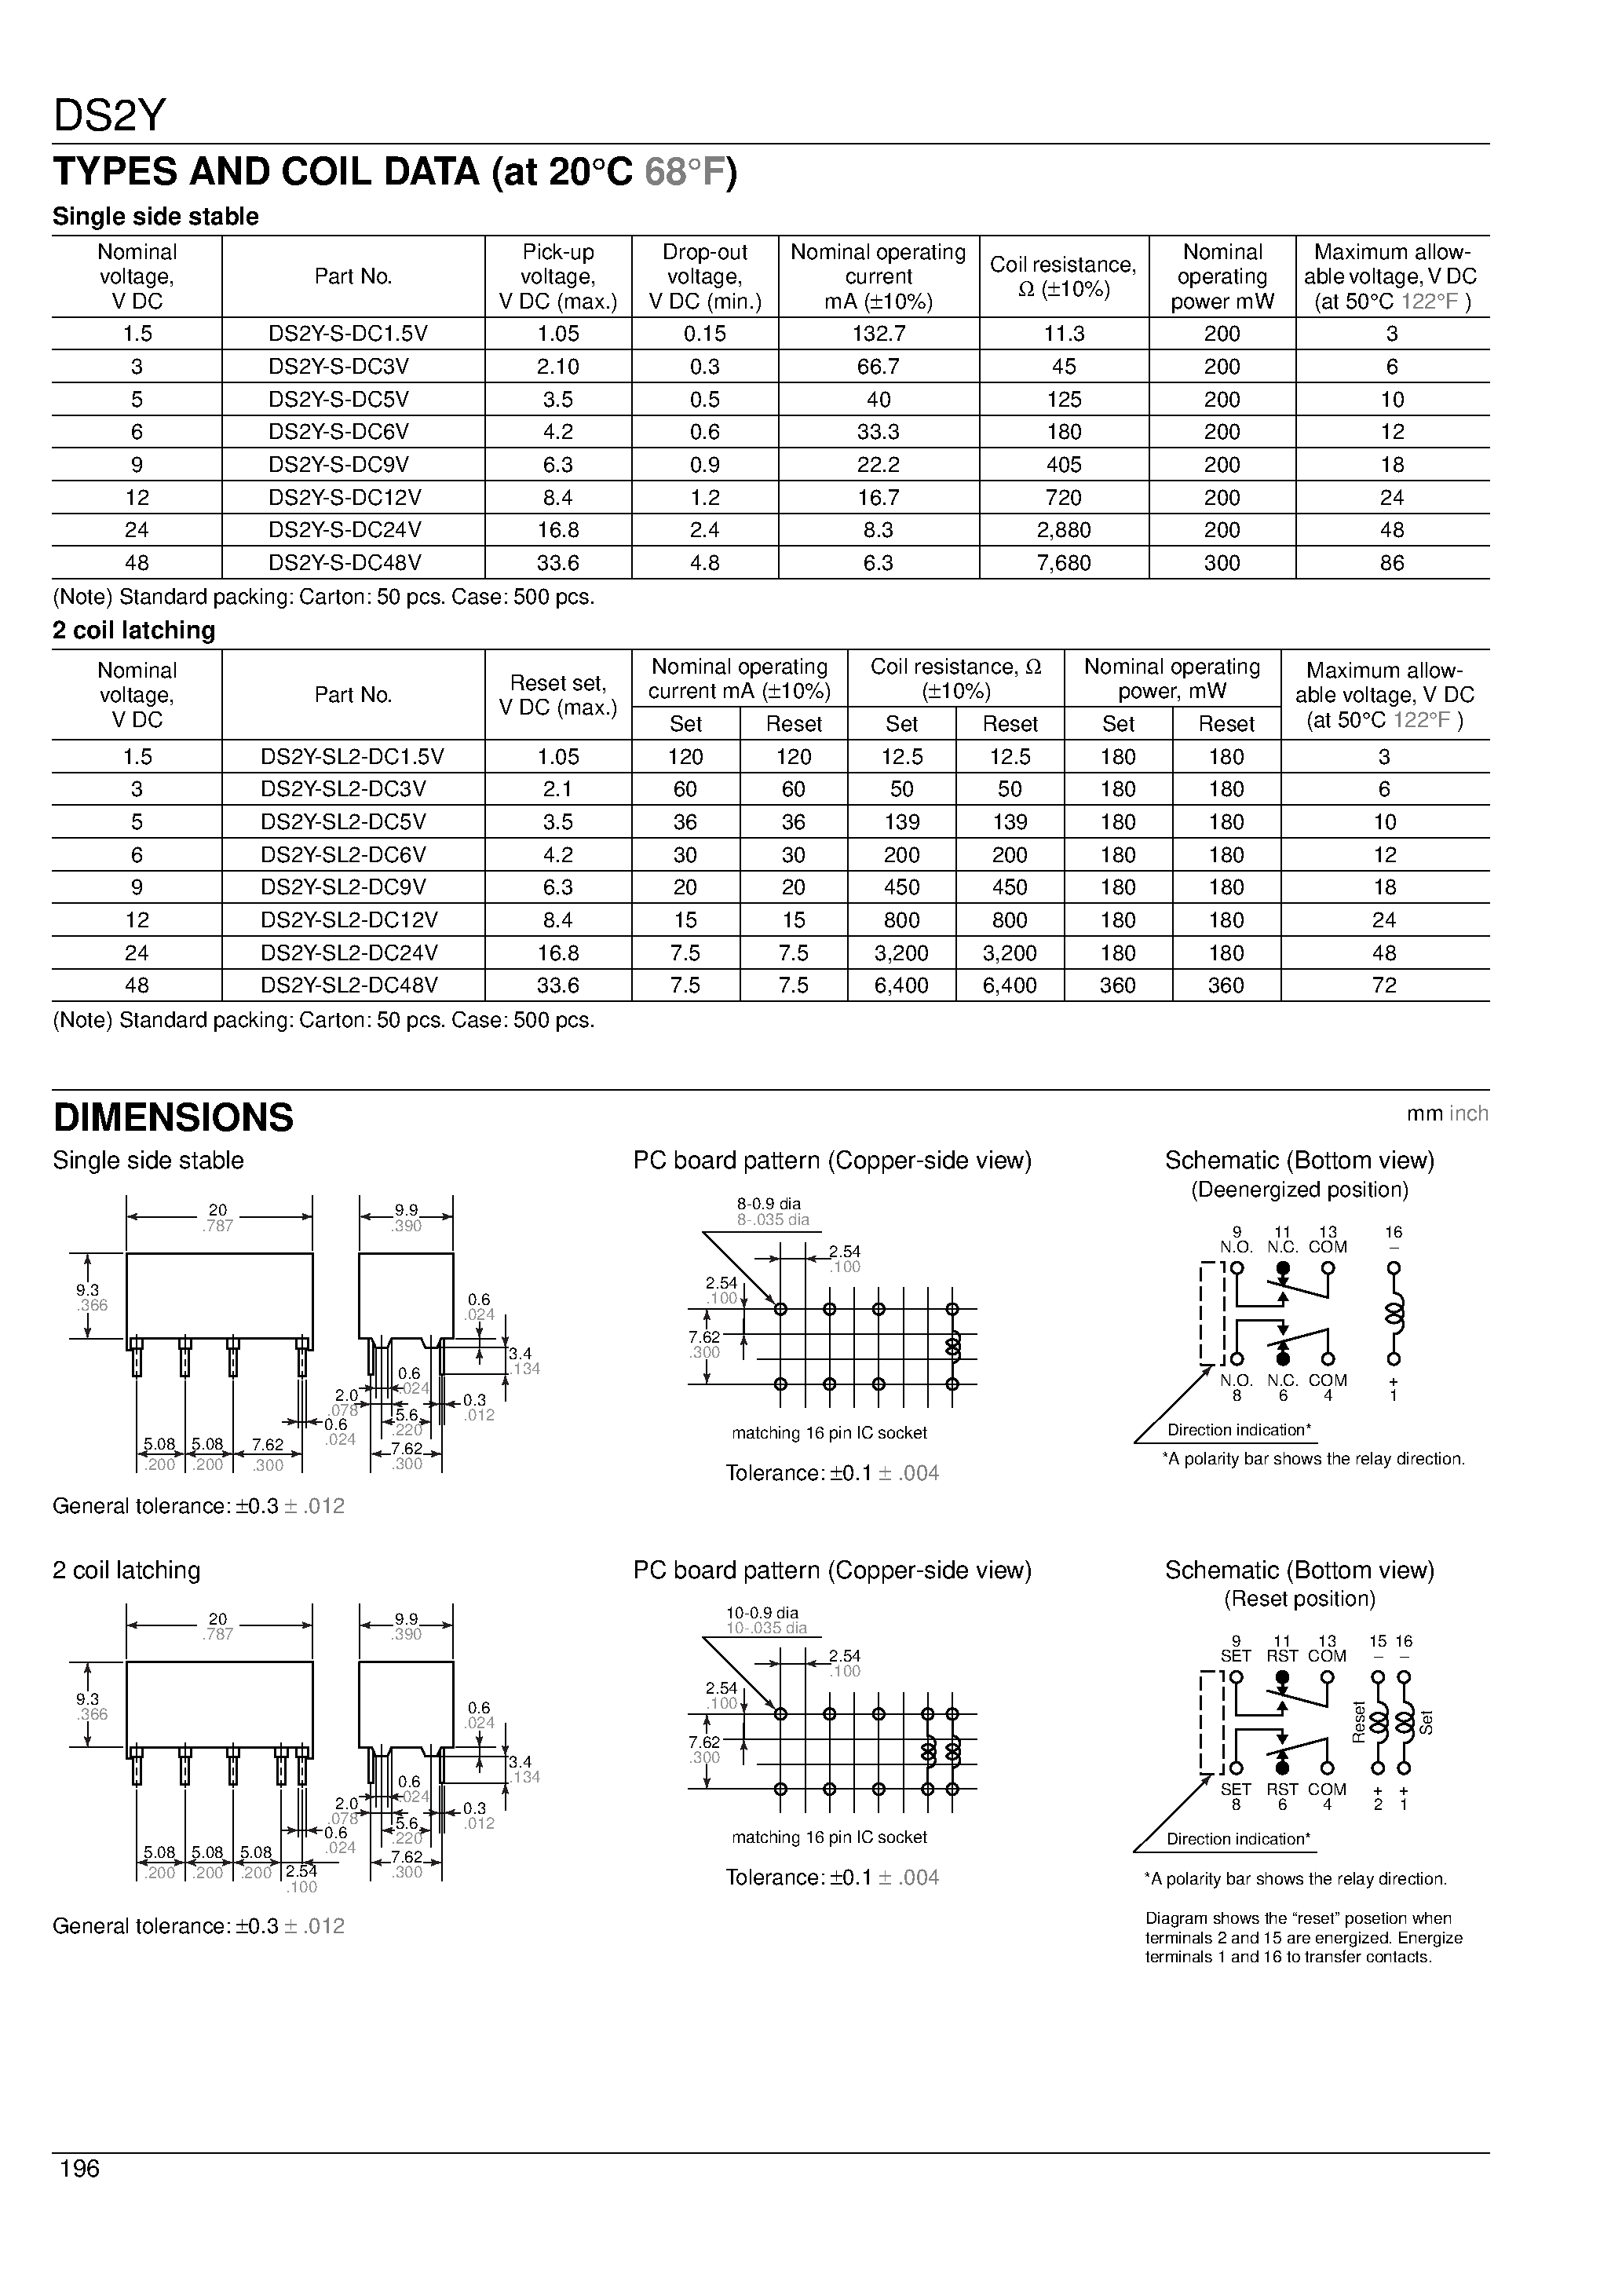 Datasheet DS2Y-S-DC6V - 2 Form C contact High sensitivity-200 mW nominal operating power page 2